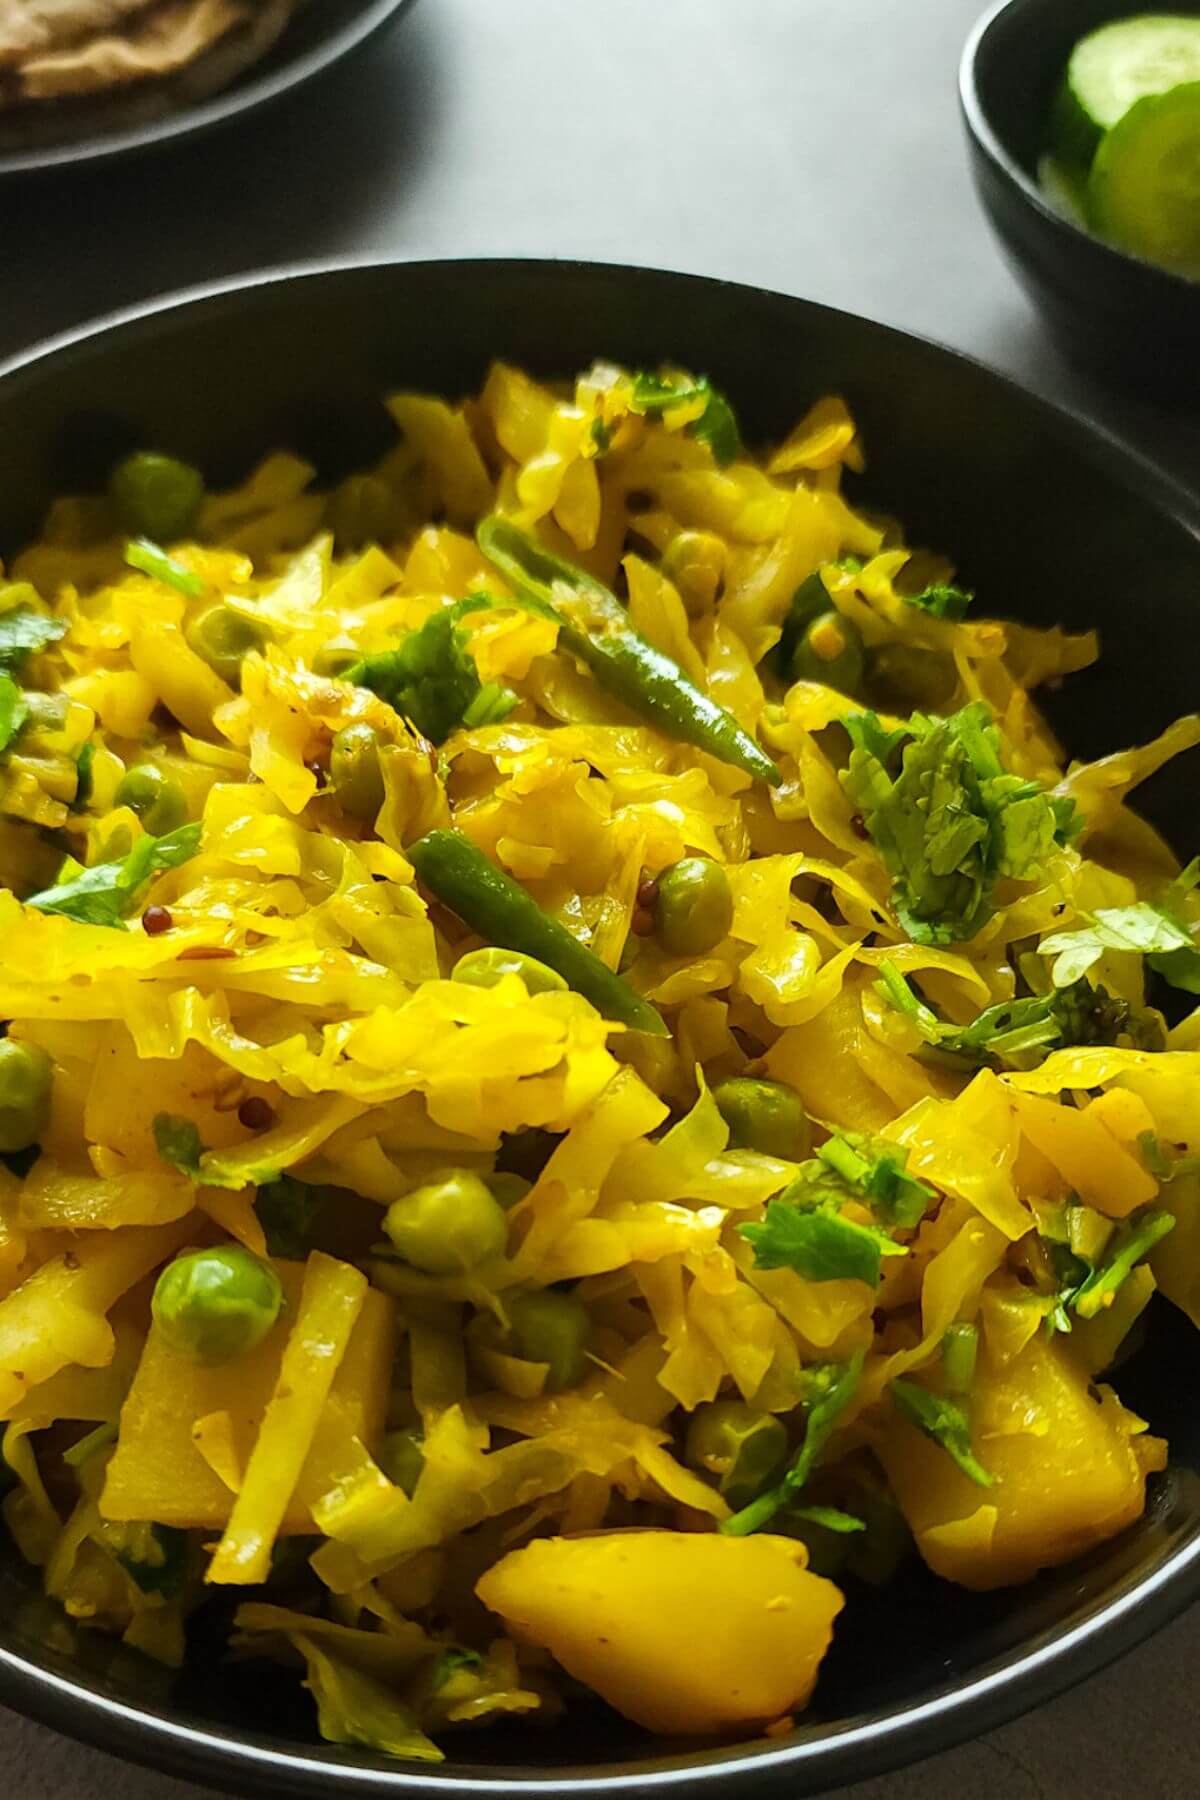 Cabbage sabzi in a bowl with salad in the background.